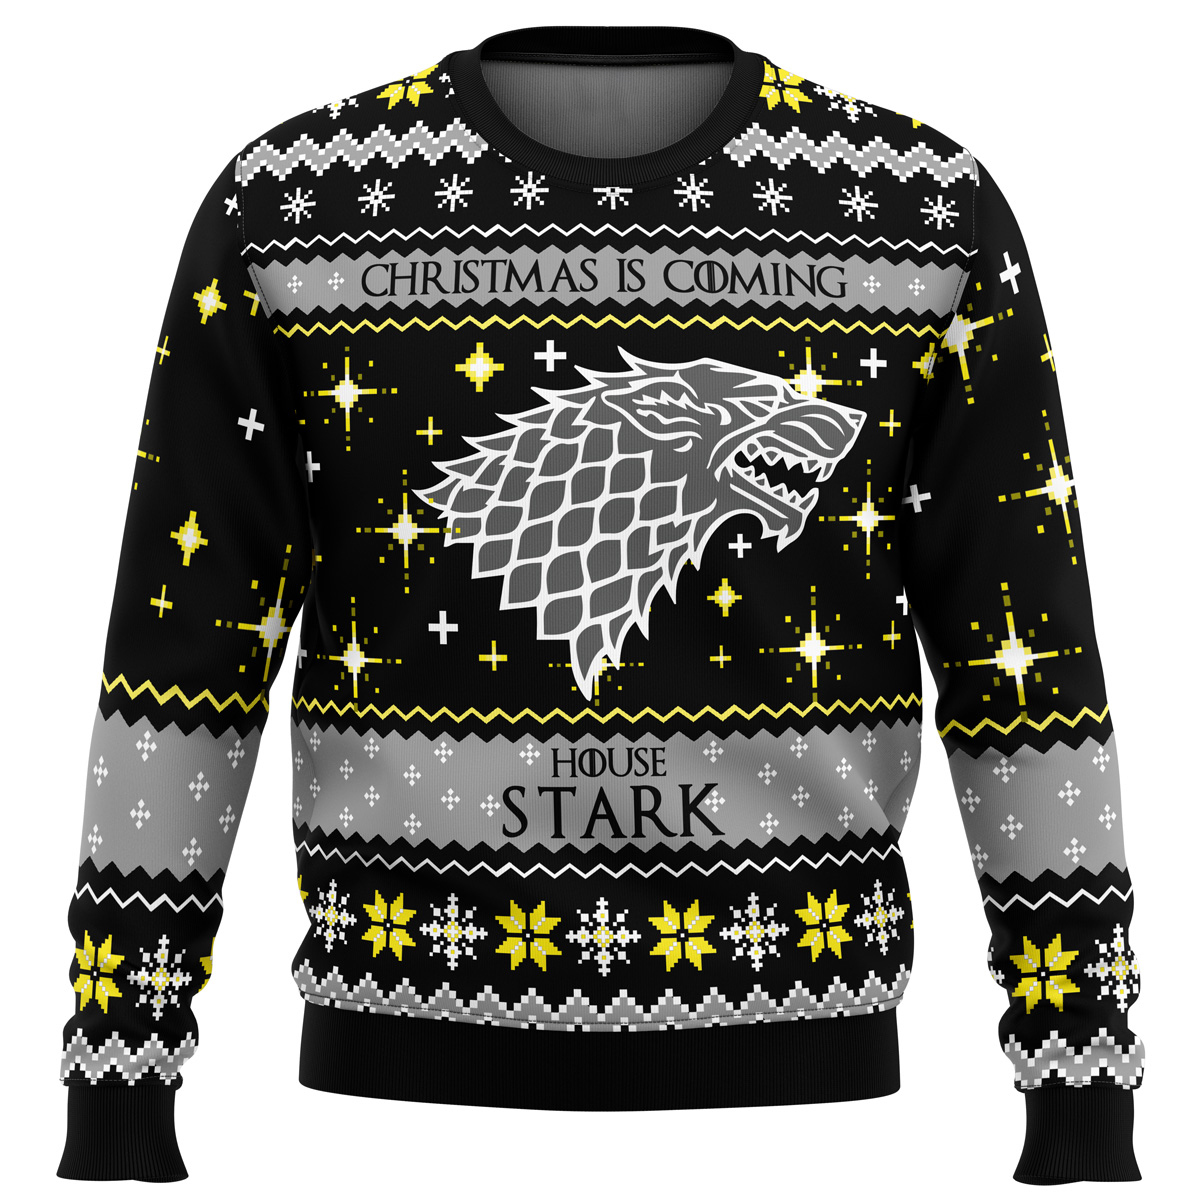 Game of Thrones House Stark Ugly Christmas Sweater